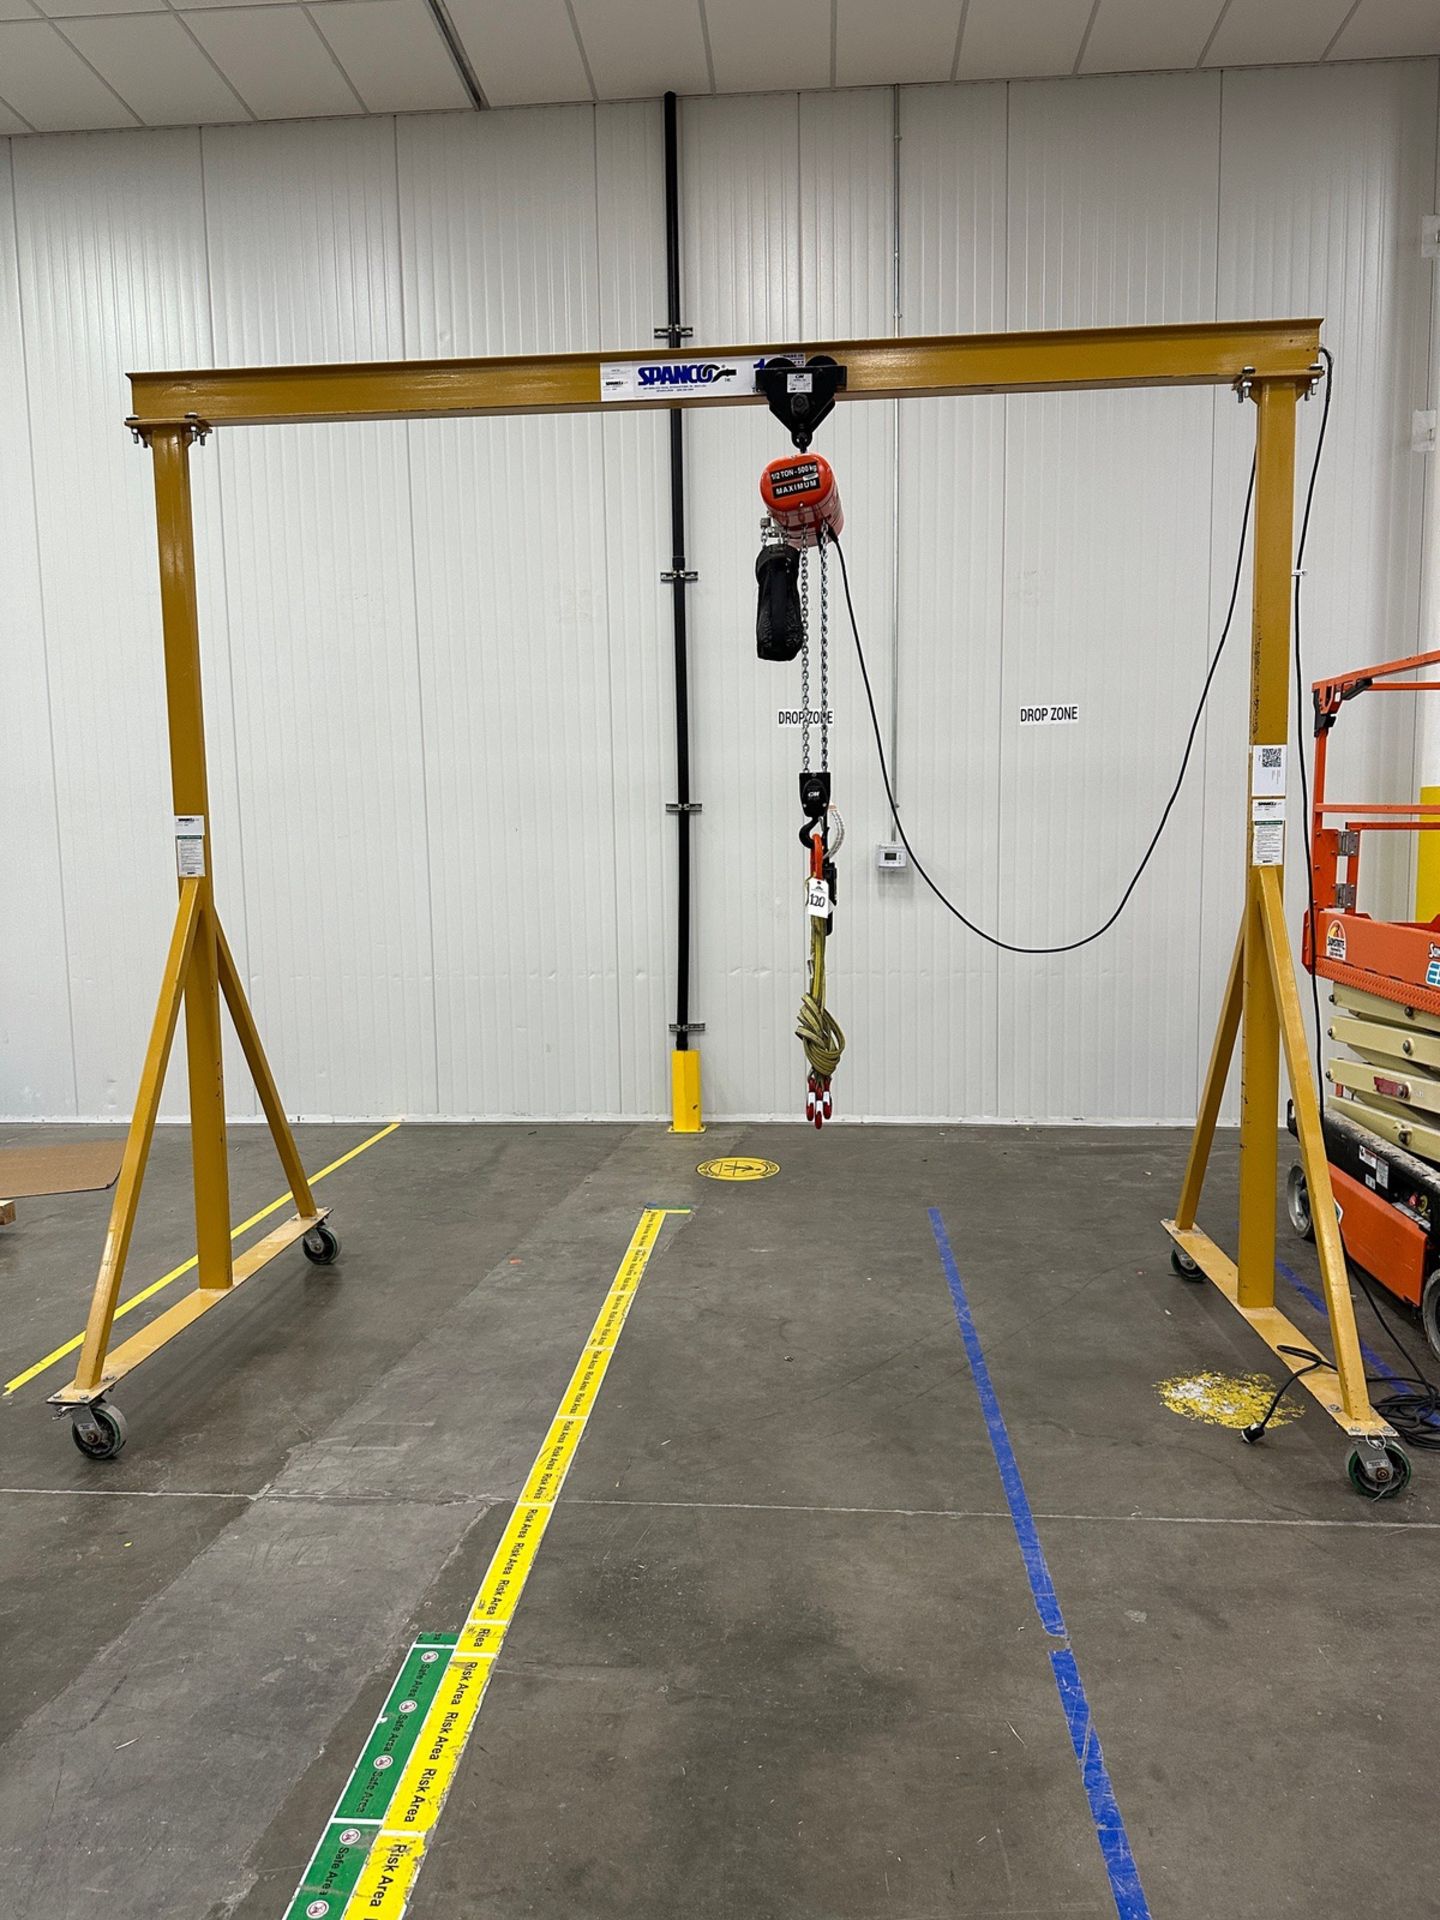 Spanco 11' Wide Gantry Crane on Casters with 1/2 Ton Chain Hoist | Rig Fee $250